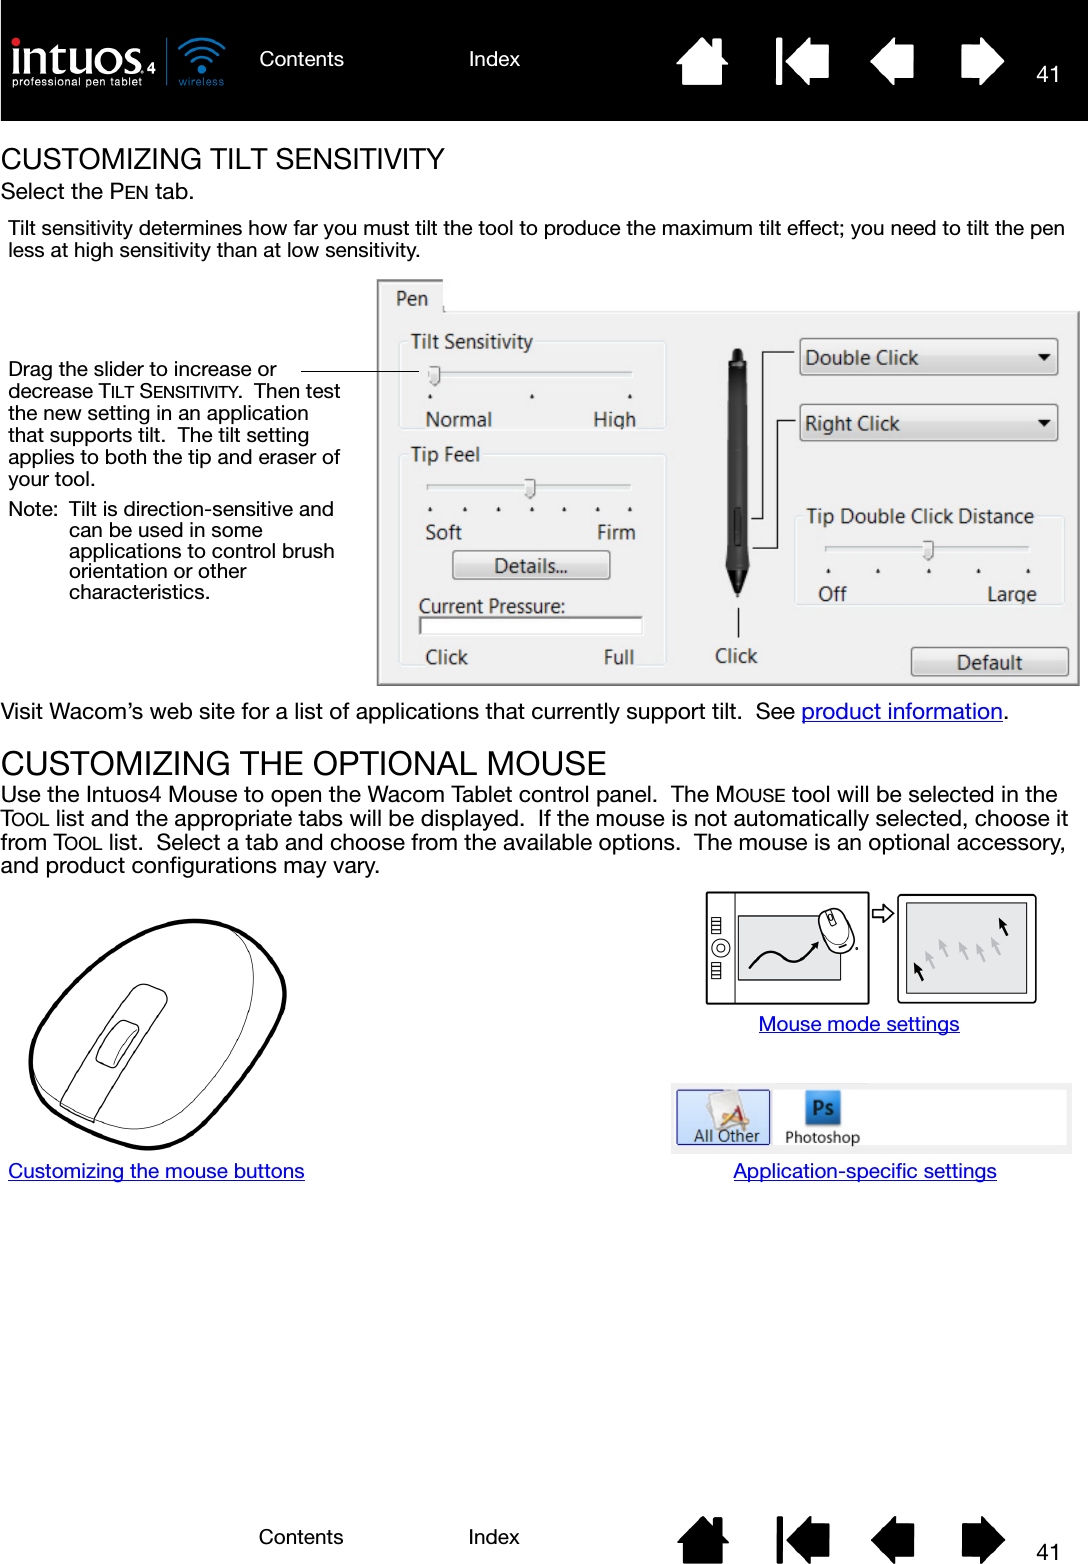 41IndexContents41IndexContentsCUSTOMIZING TILT SENSITIVITYSelect the PEN tab.Visit Wacom’s web site for a list of applications that currently support tilt.  See product information.CUSTOMIZING THE OPTIONAL MOUSEUse the Intuos4 Mouse to open the Wacom Tablet control panel.  The MOUSE tool will be selected in the TOOL list and the appropriate tabs will be displayed.  If the mouse is not automatically selected, choose it from TOOL list.  Select a tab and choose from the available options.  The mouse is an optional accessory, and product configurations may vary.Drag the slider to increase or decrease TILT SENSITIVITY.  Then test the new setting in an application that supports tilt.  The tilt setting applies to both the tip and eraser of your tool.Note:  Tilt is direction-sensitive and can be used in some applications to control brush orientation or other characteristics.Tilt sensitivity determines how far you must tilt the tool to produce the maximum tilt effect; you need to tilt the pen less at high sensitivity than at low sensitivity.Customizing the mouse buttonsMouse mode settingsApplication-specific settings